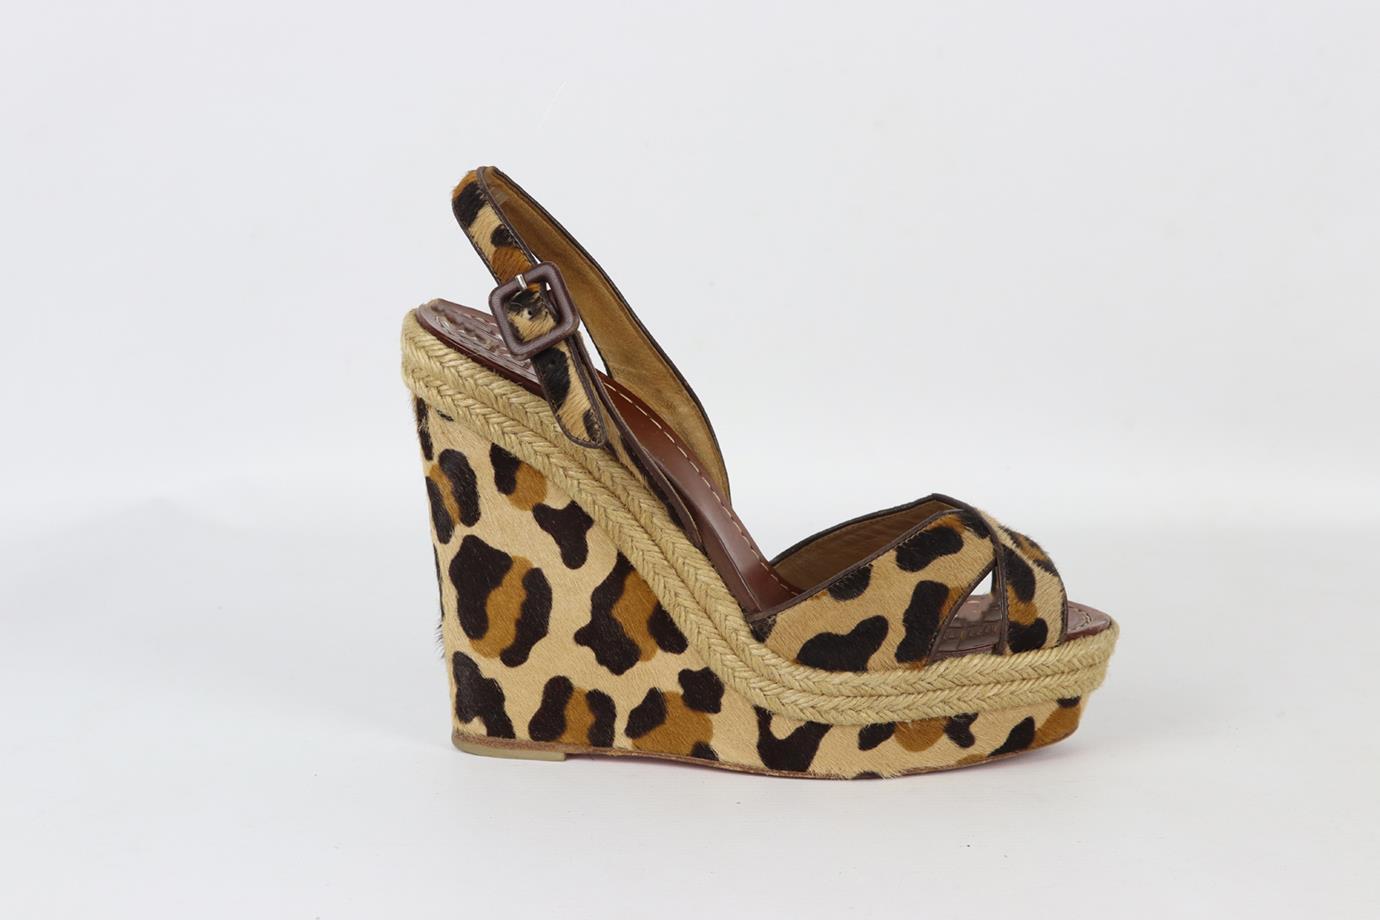 Christian Louboutin leopard print calf hair wedge sandals. Brown, beige and tan. Slip on. Does not come with dustbag or box. Size: EU 39 (UK 6, US 9). Insole: 9.6 in. Heel Height: 5.4 in. Platform: 1.6 in. Very good condition - Wear to soles. Light